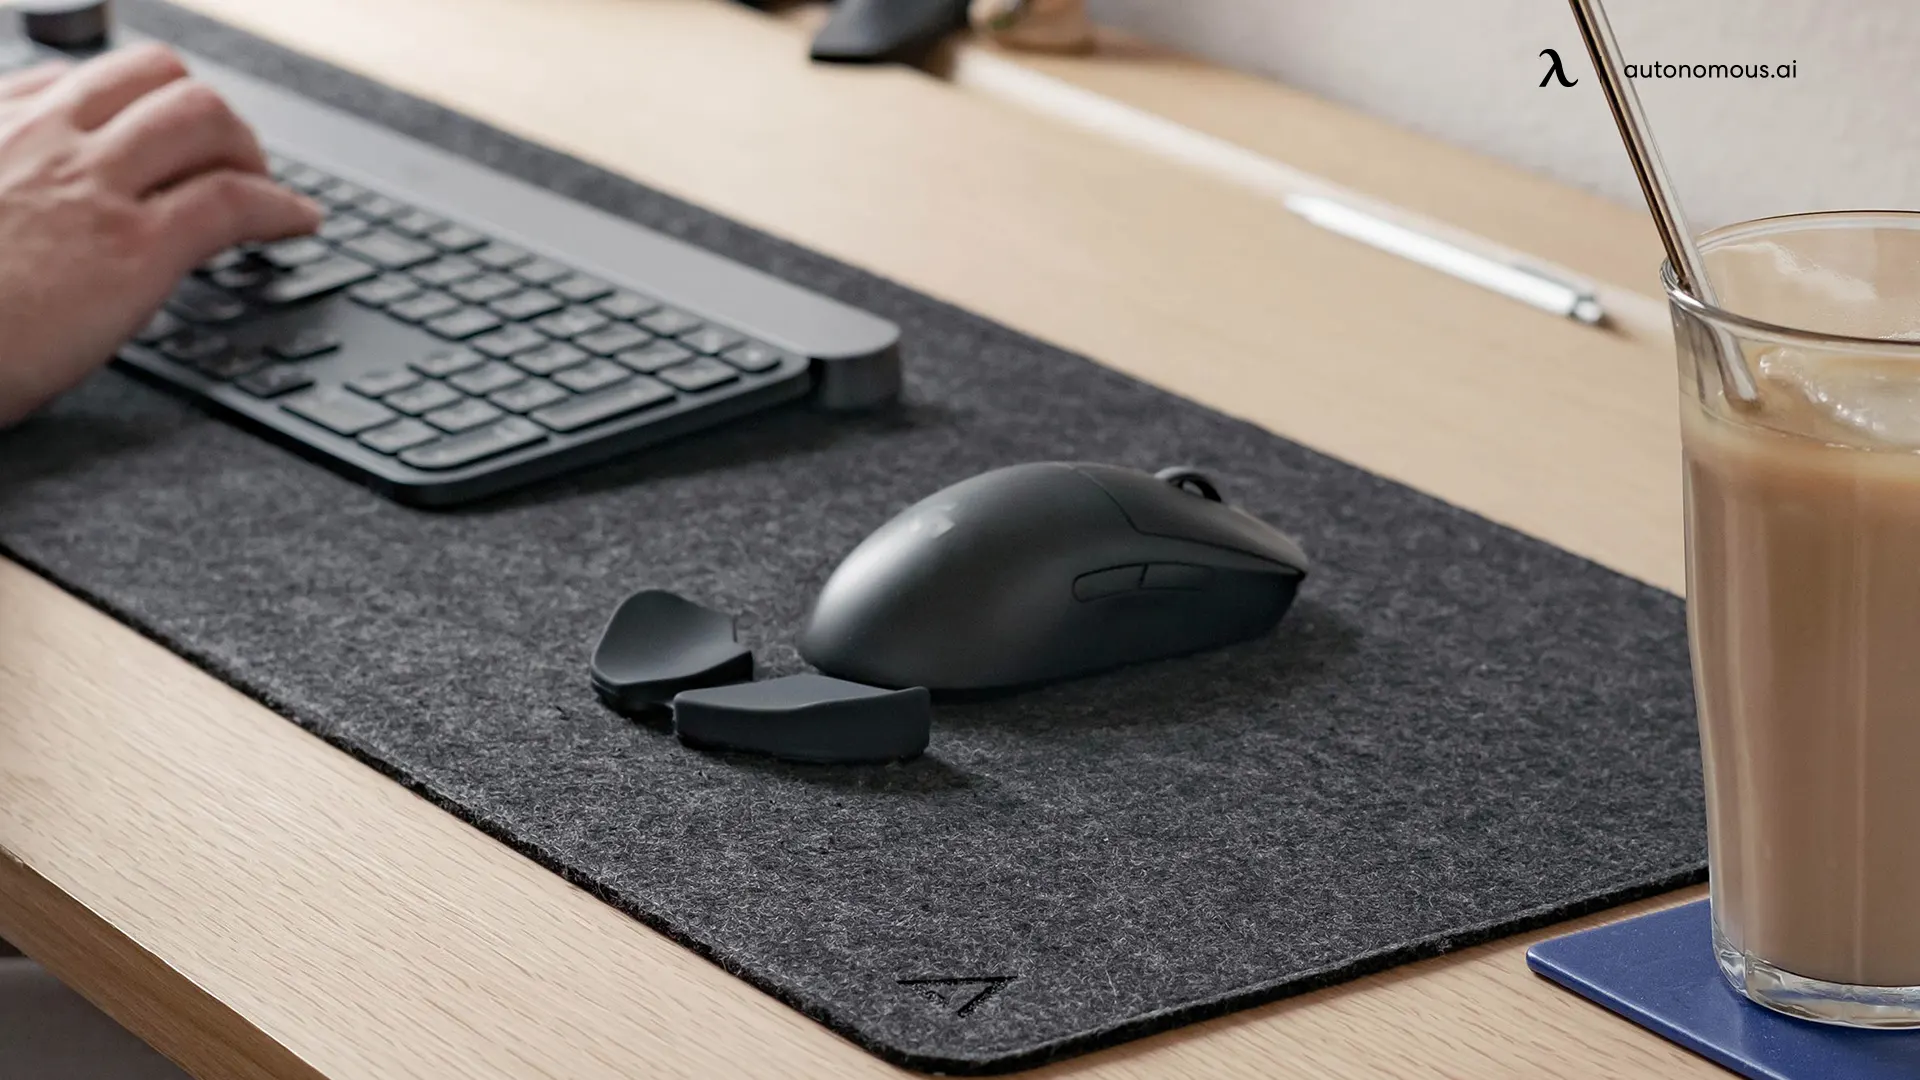 The desk mat should be dried